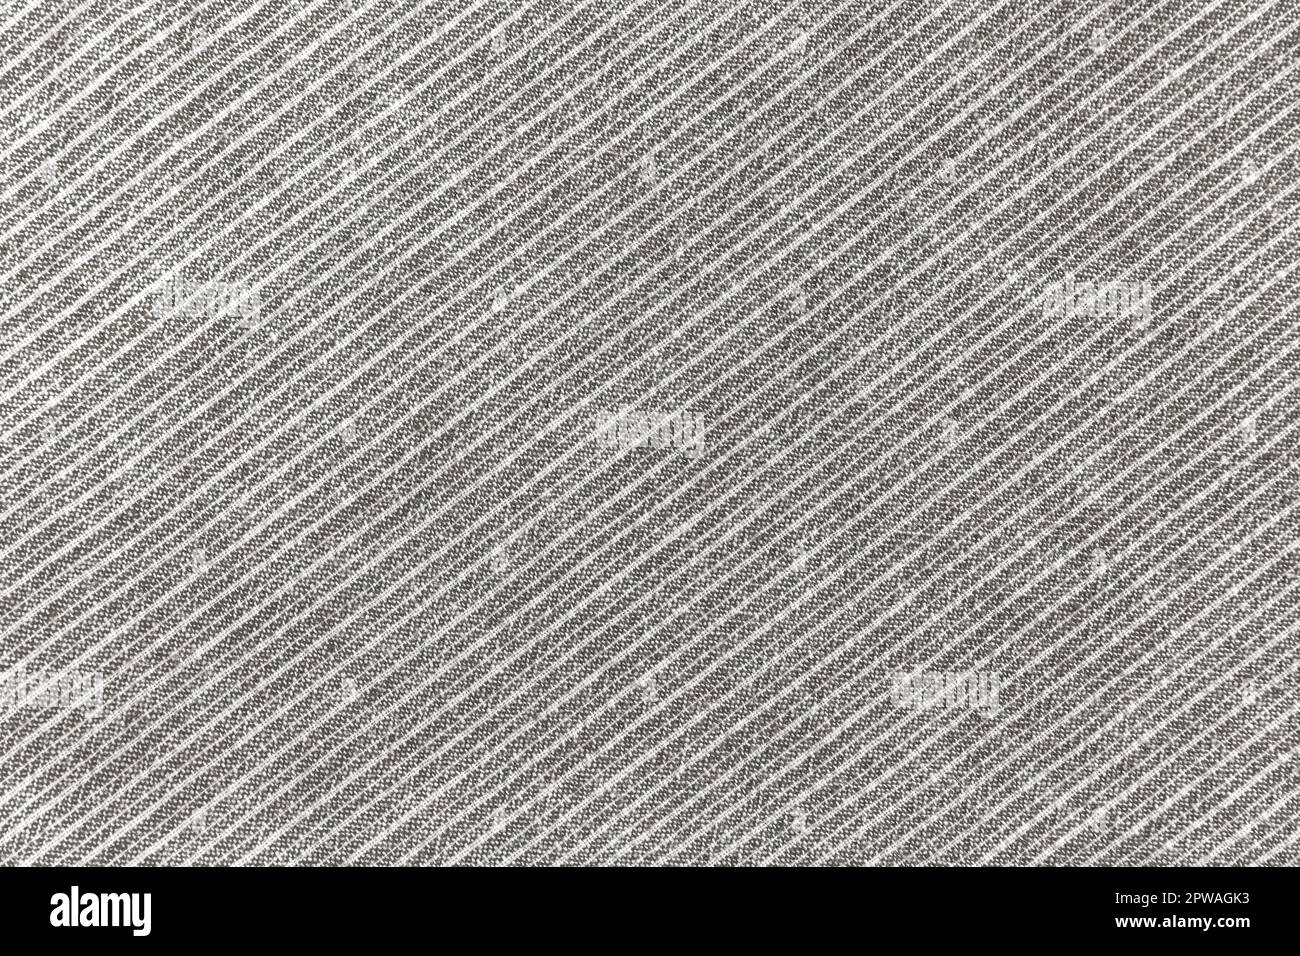 Grey cotton fabric texture background, seamless pattern of natural